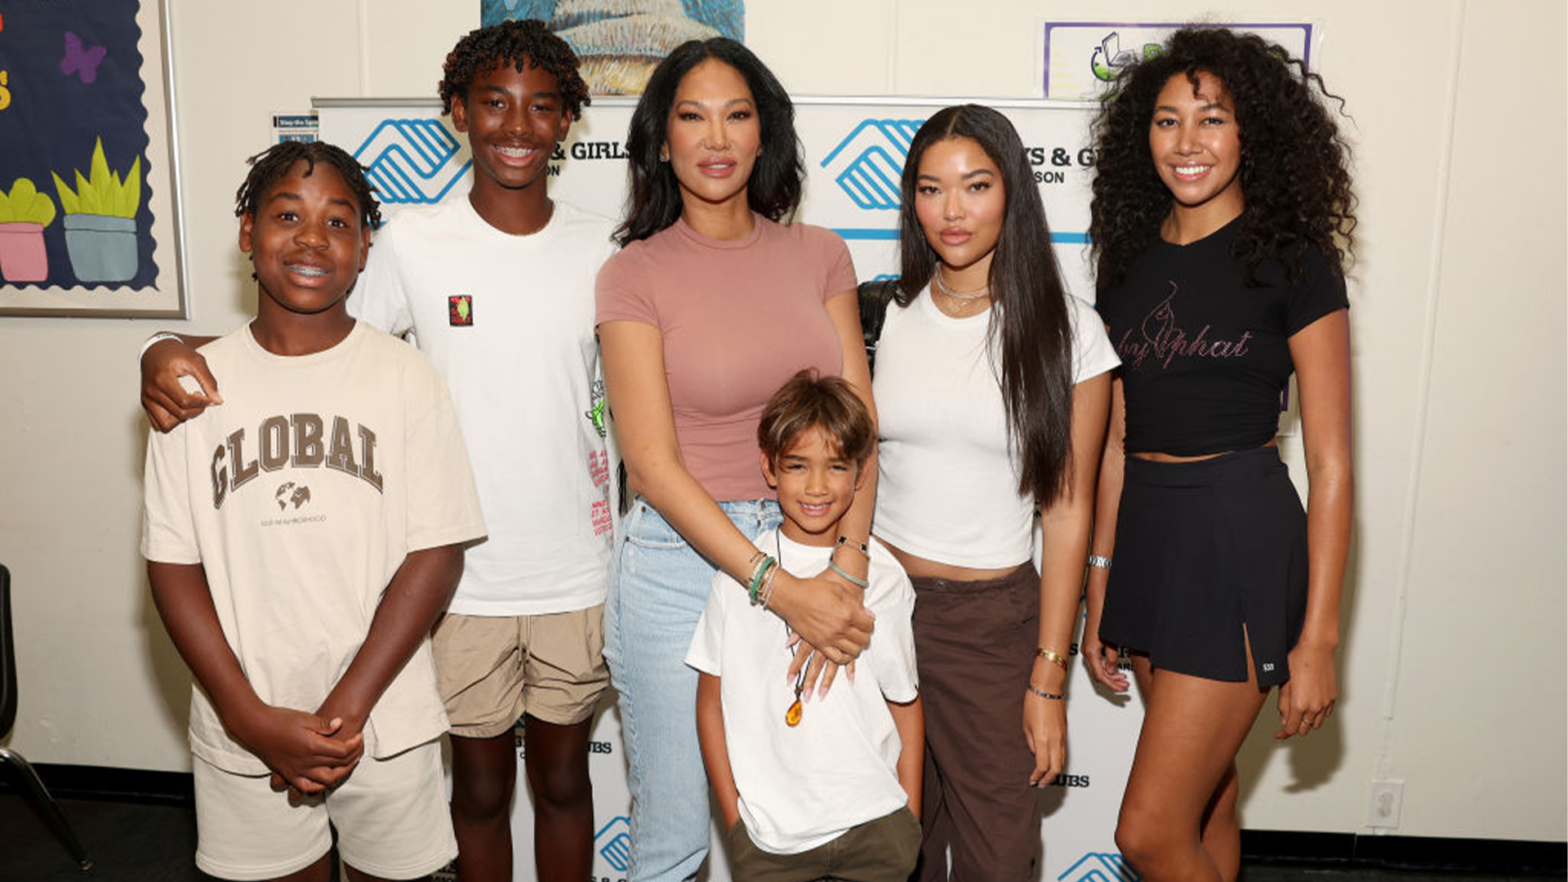 Kimora Lee Simmons Has Built Part Of Her $200M Fortune From Her Catwalk, But Her Proudest Shoes To Strut Are Those As A Mom Of Five